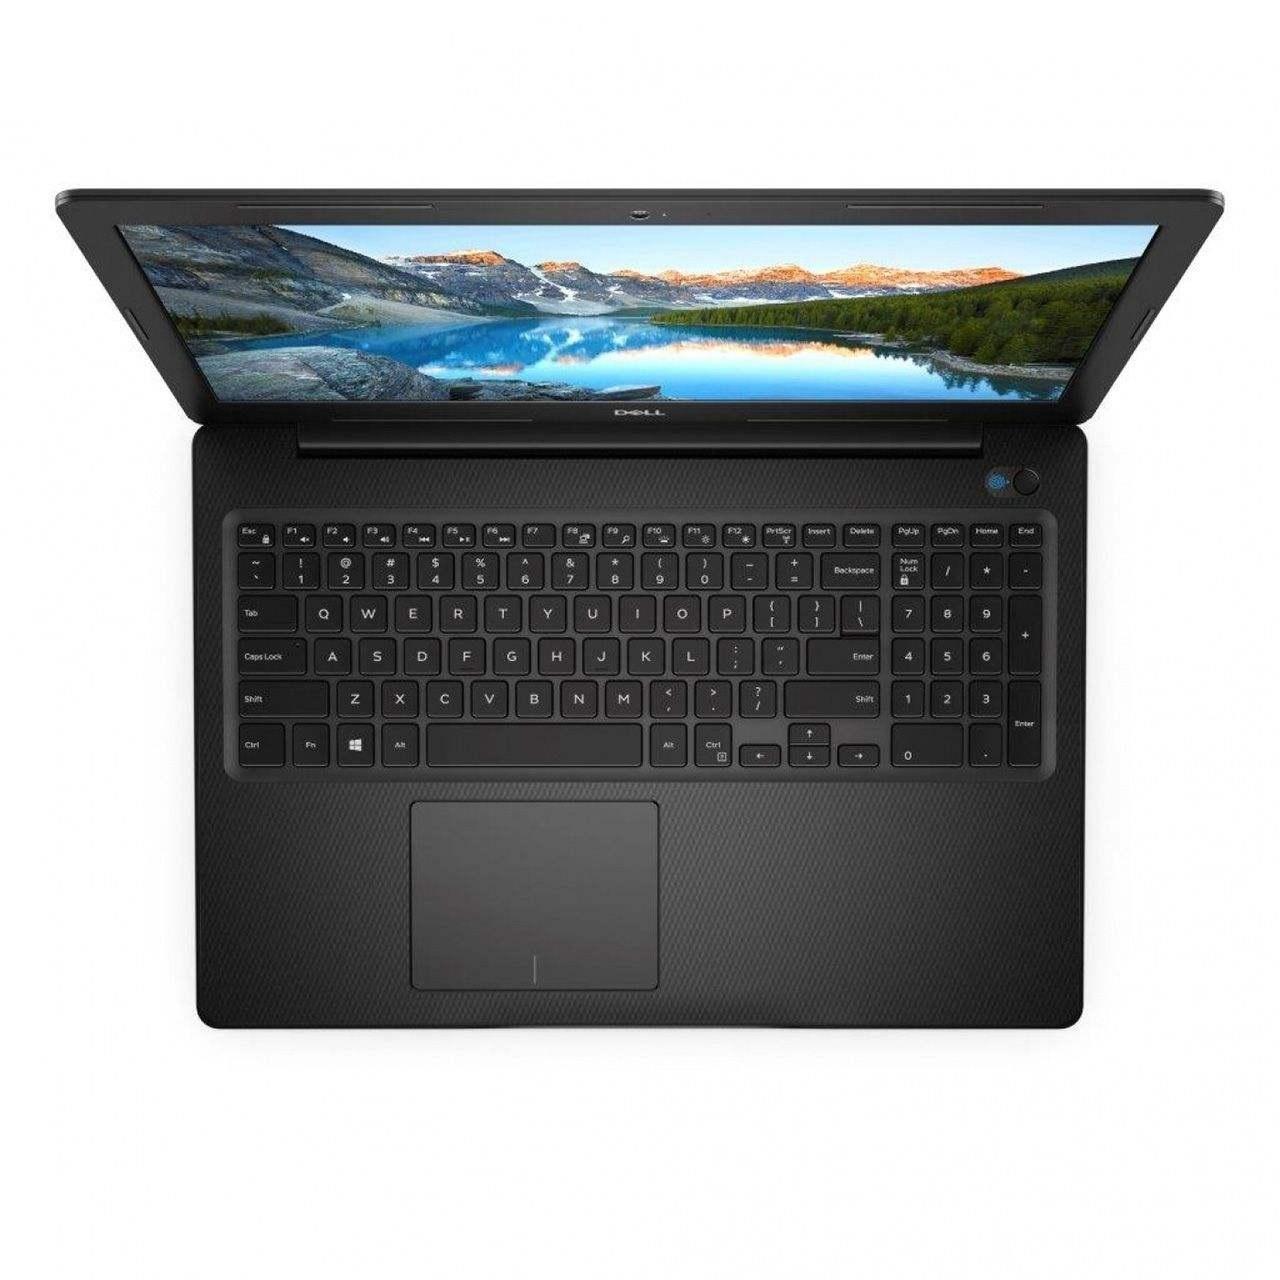 Dell inspiron 3580-X 15inch laptop